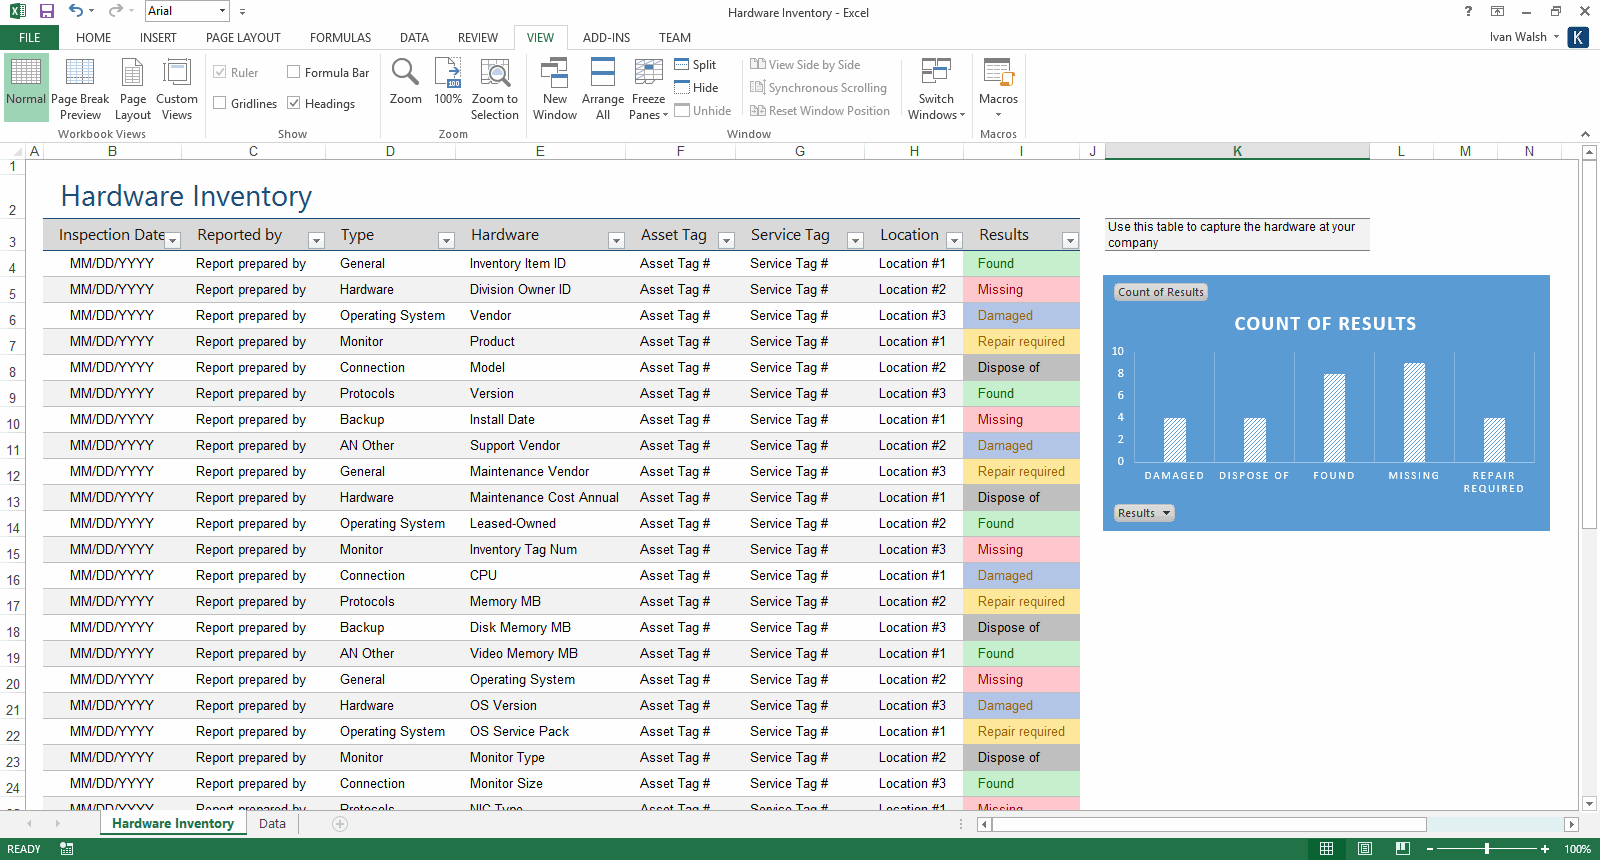 Ms Excel Spreadsheet Templates 2